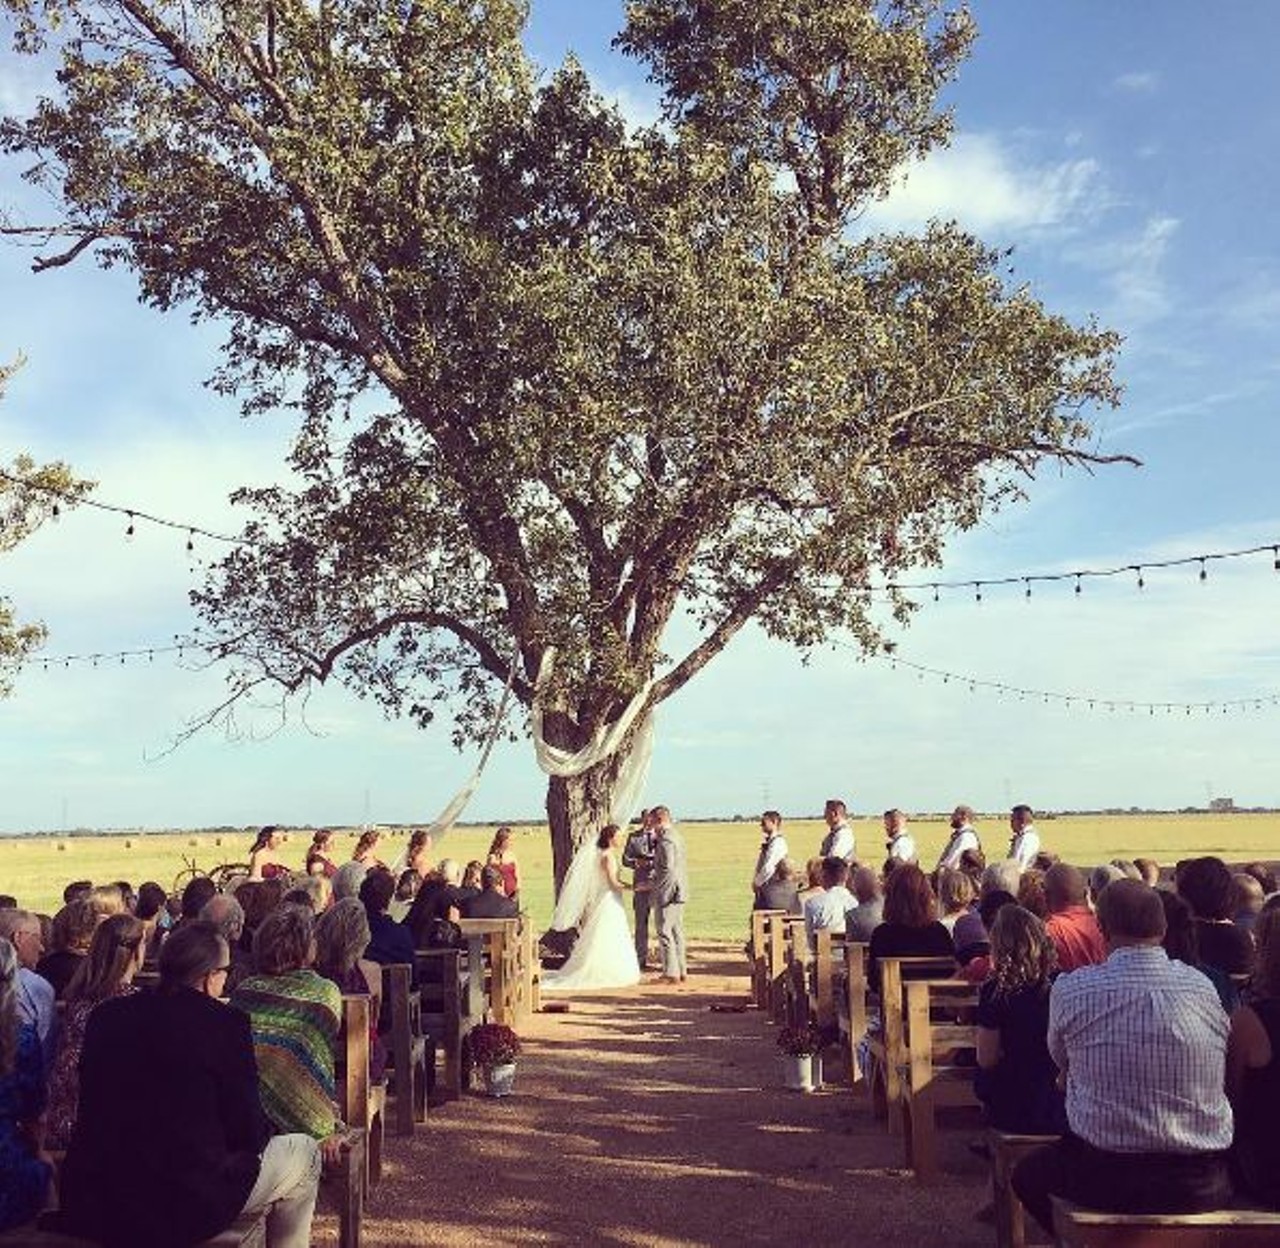 The Allen Farmhaus
Exchange your vows underneath a historic 300-year-old oak tree with a view of the land for miles. The Allen Farmhaus offers both indoor and outdoor reception areas.
606 FM 758, New Braunfels, theallenfarmhaus.com
Photo via Instagram, theallenfarmhaus